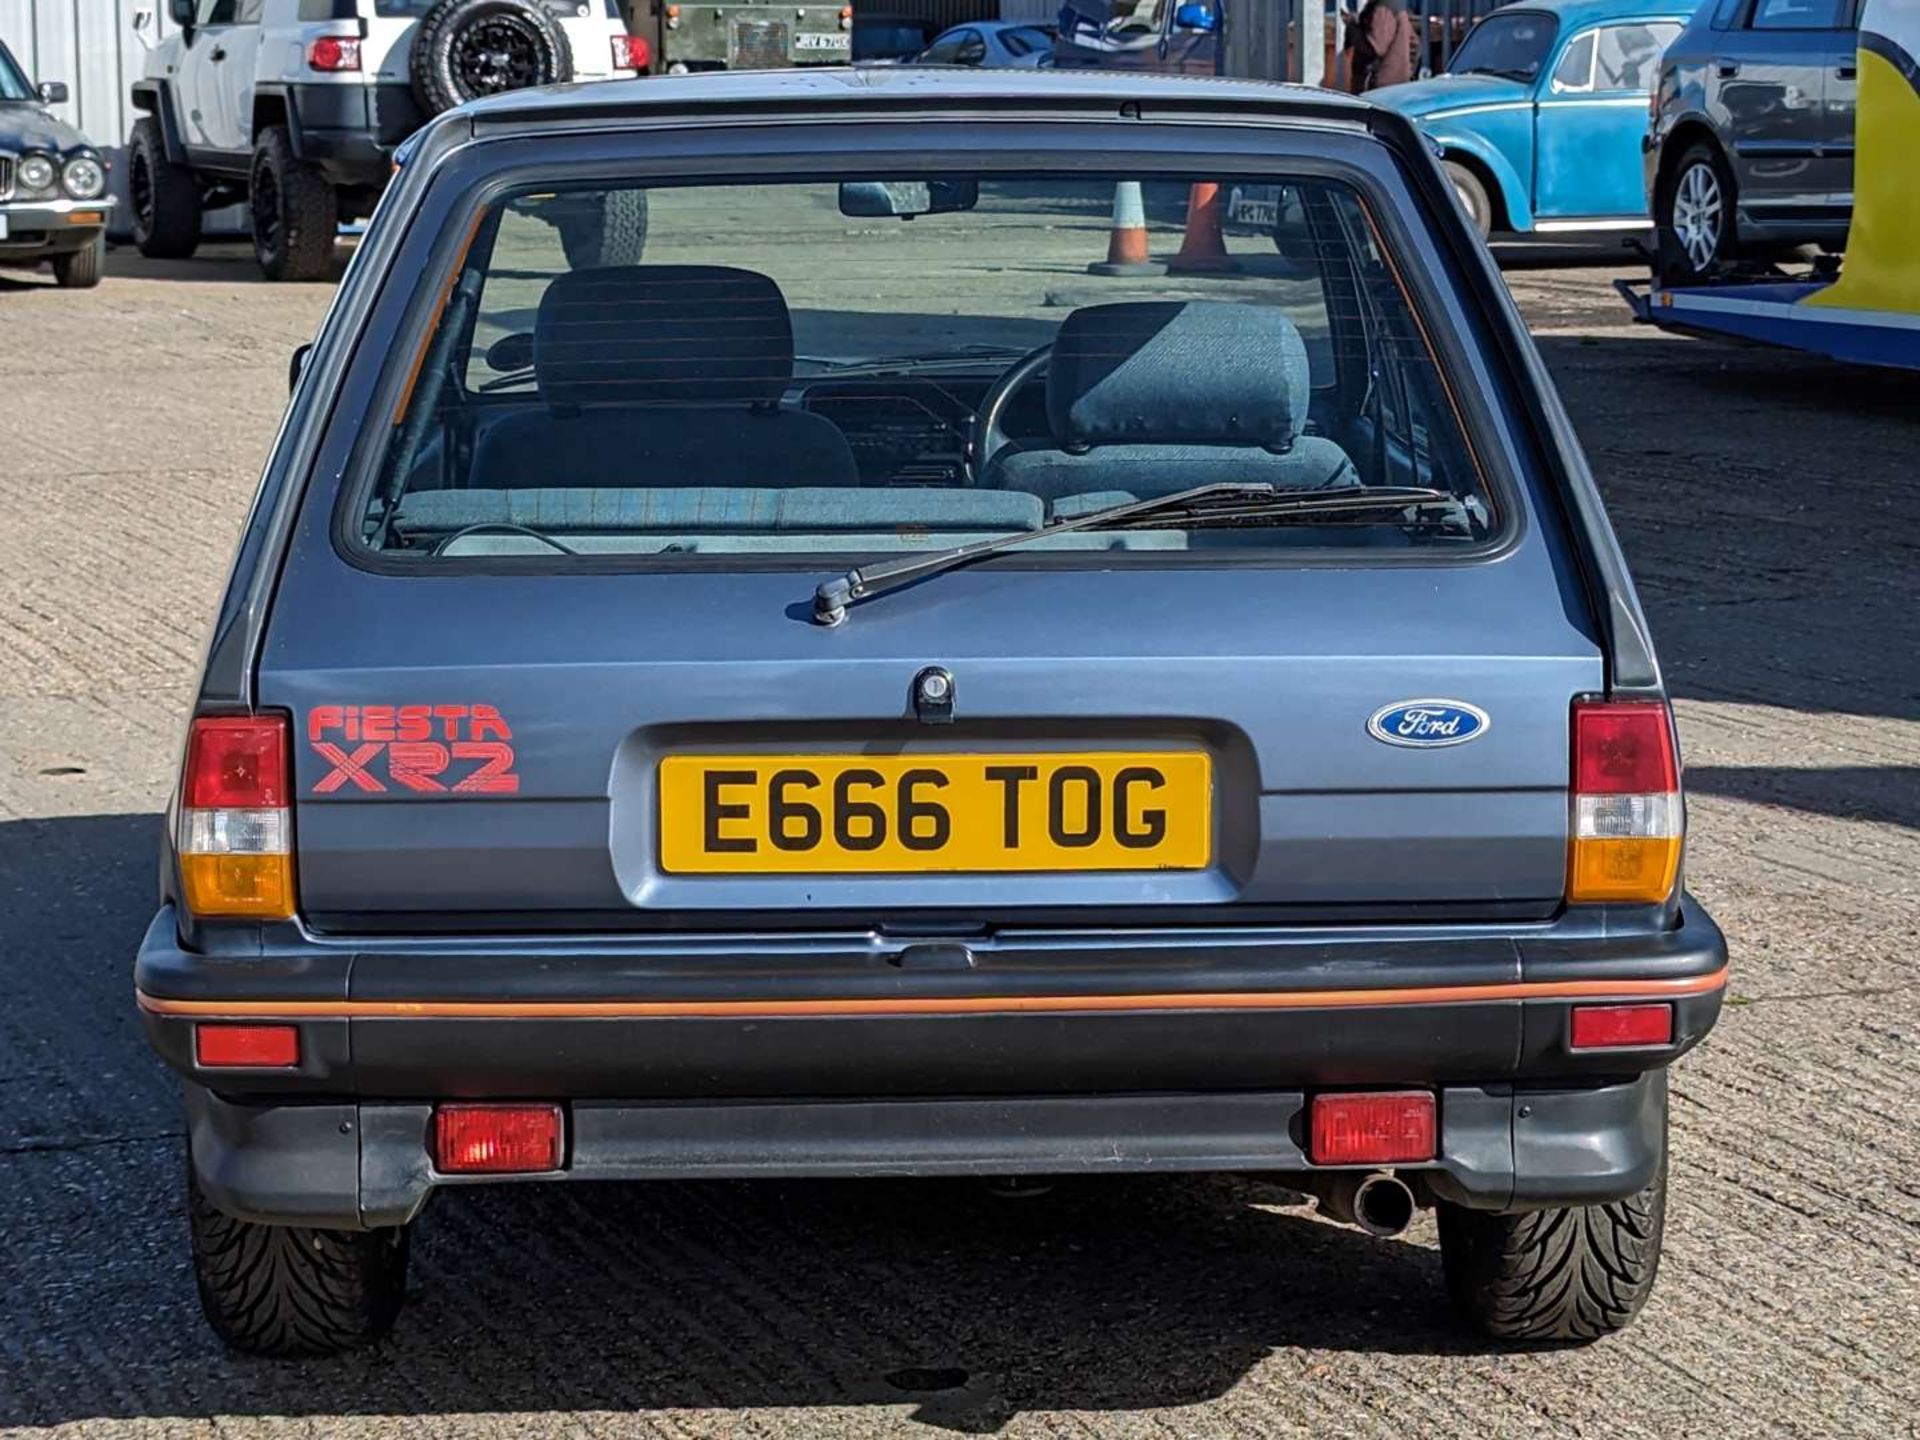 1987 FORD FIESTA XR2 - Image 7 of 25